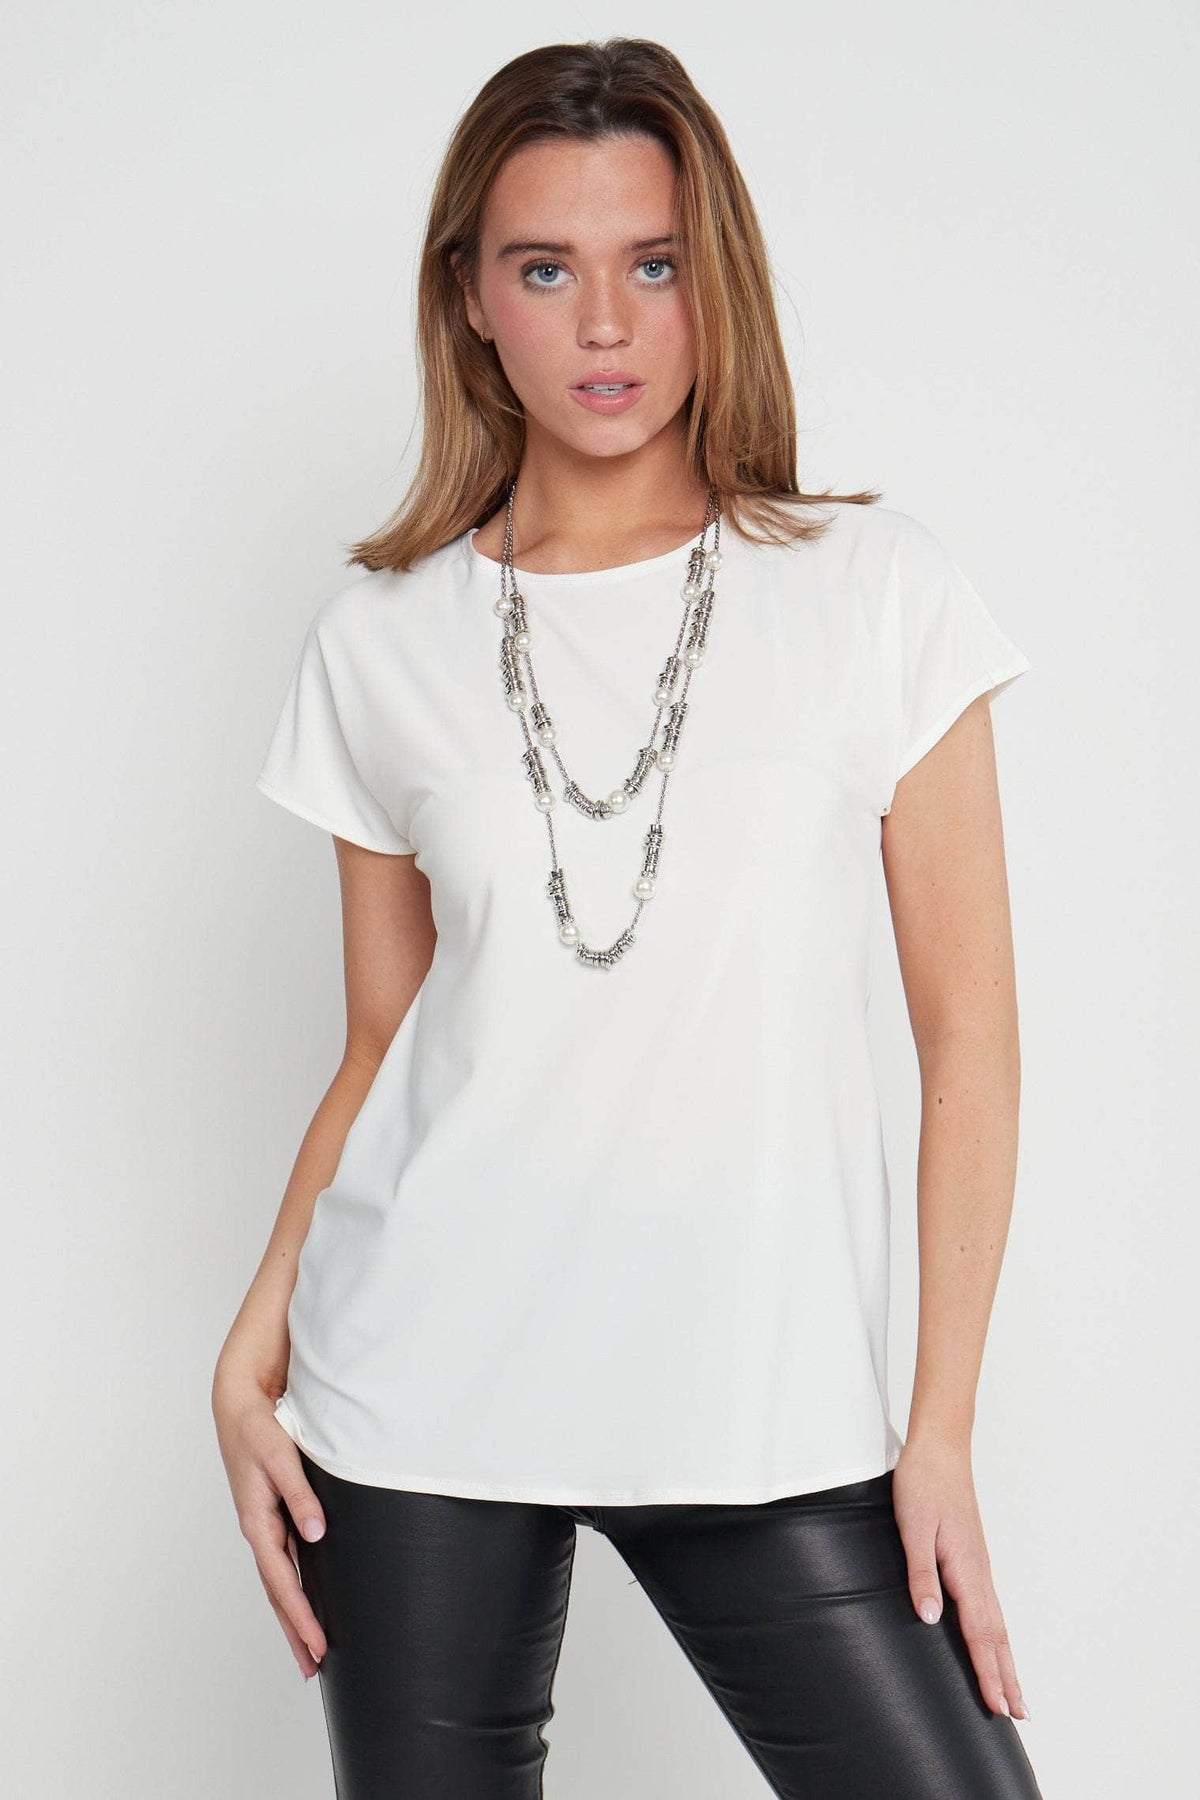 Saloos Top Cream / 12 Essential Extended-Shoulder Top with Necklace